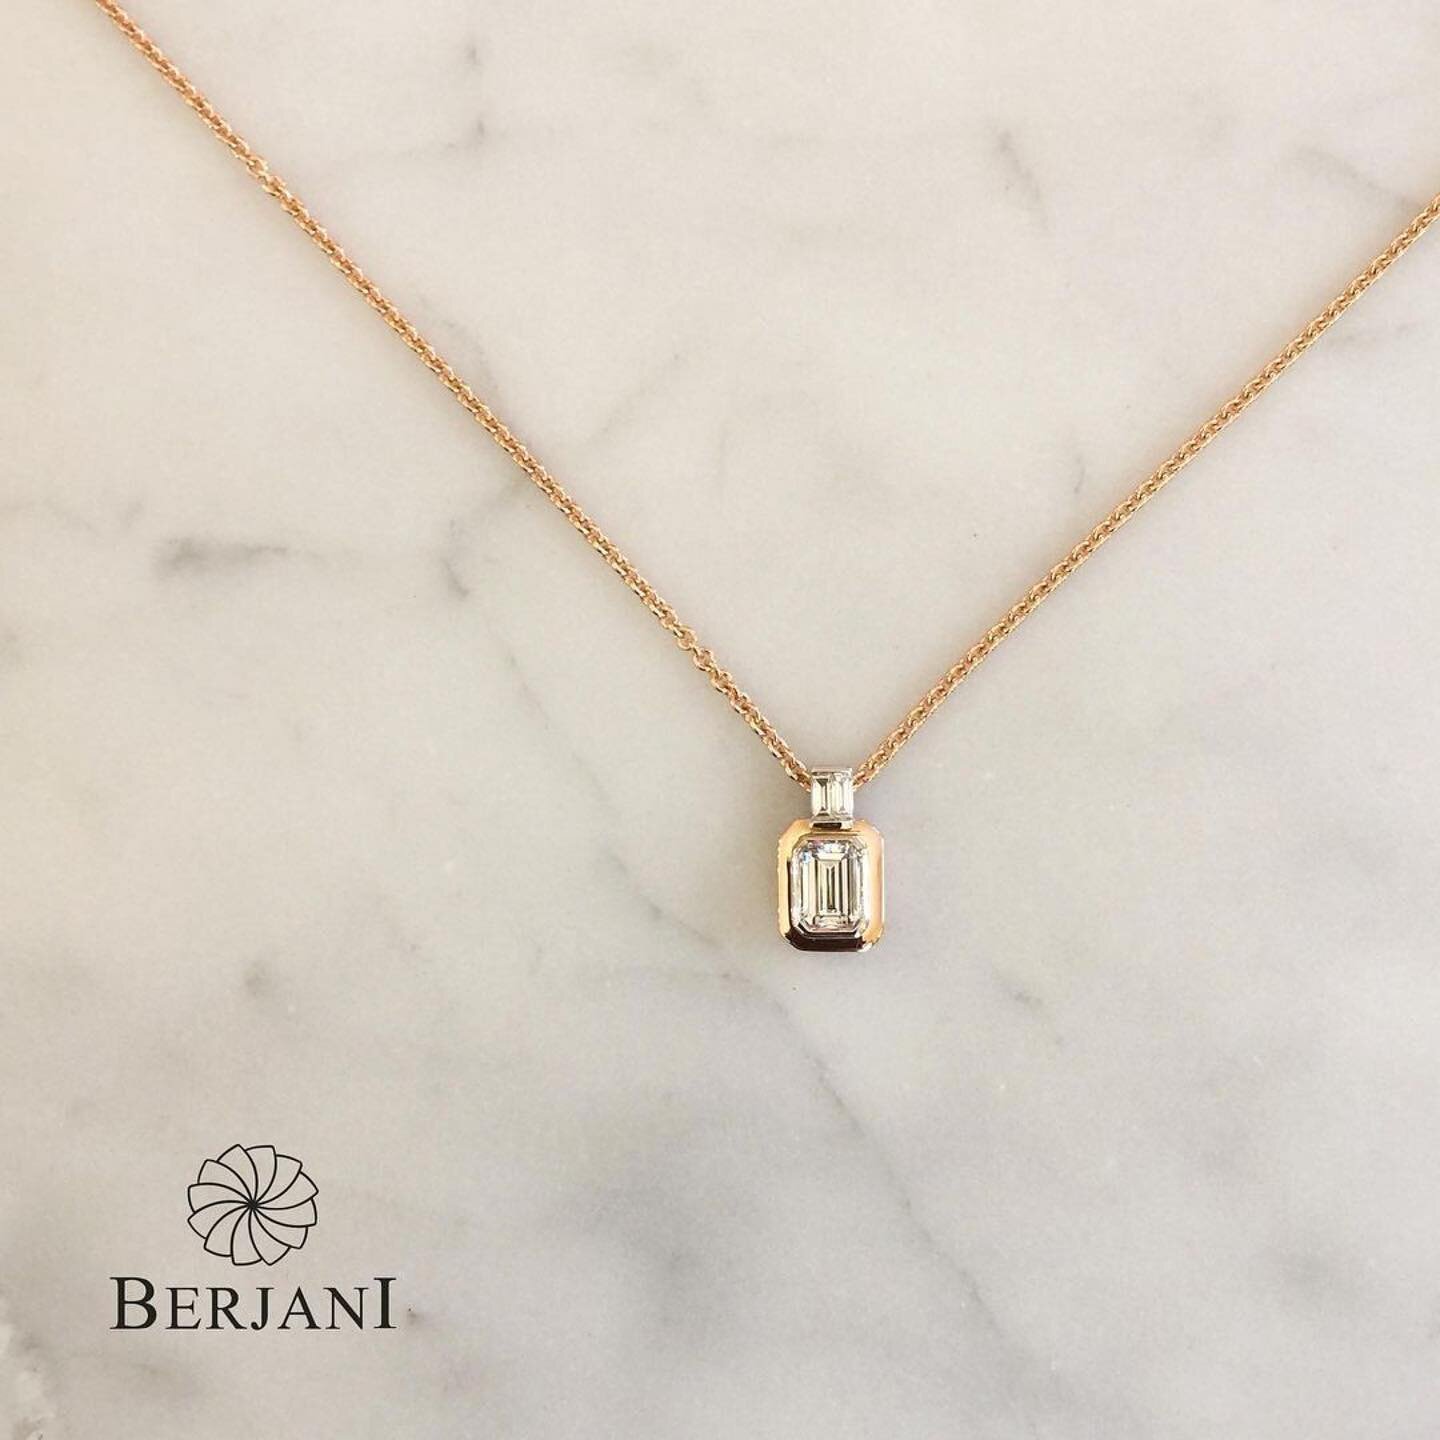 BERJANI Remakes - One emerald cut and two baguette cut diamonds taken from an old piece of jewellery no longer worn&hellip;. Berj then designed and handcrafted this beautiful rose/white gold pendant and attached it to an elegant rose gold chain&helli